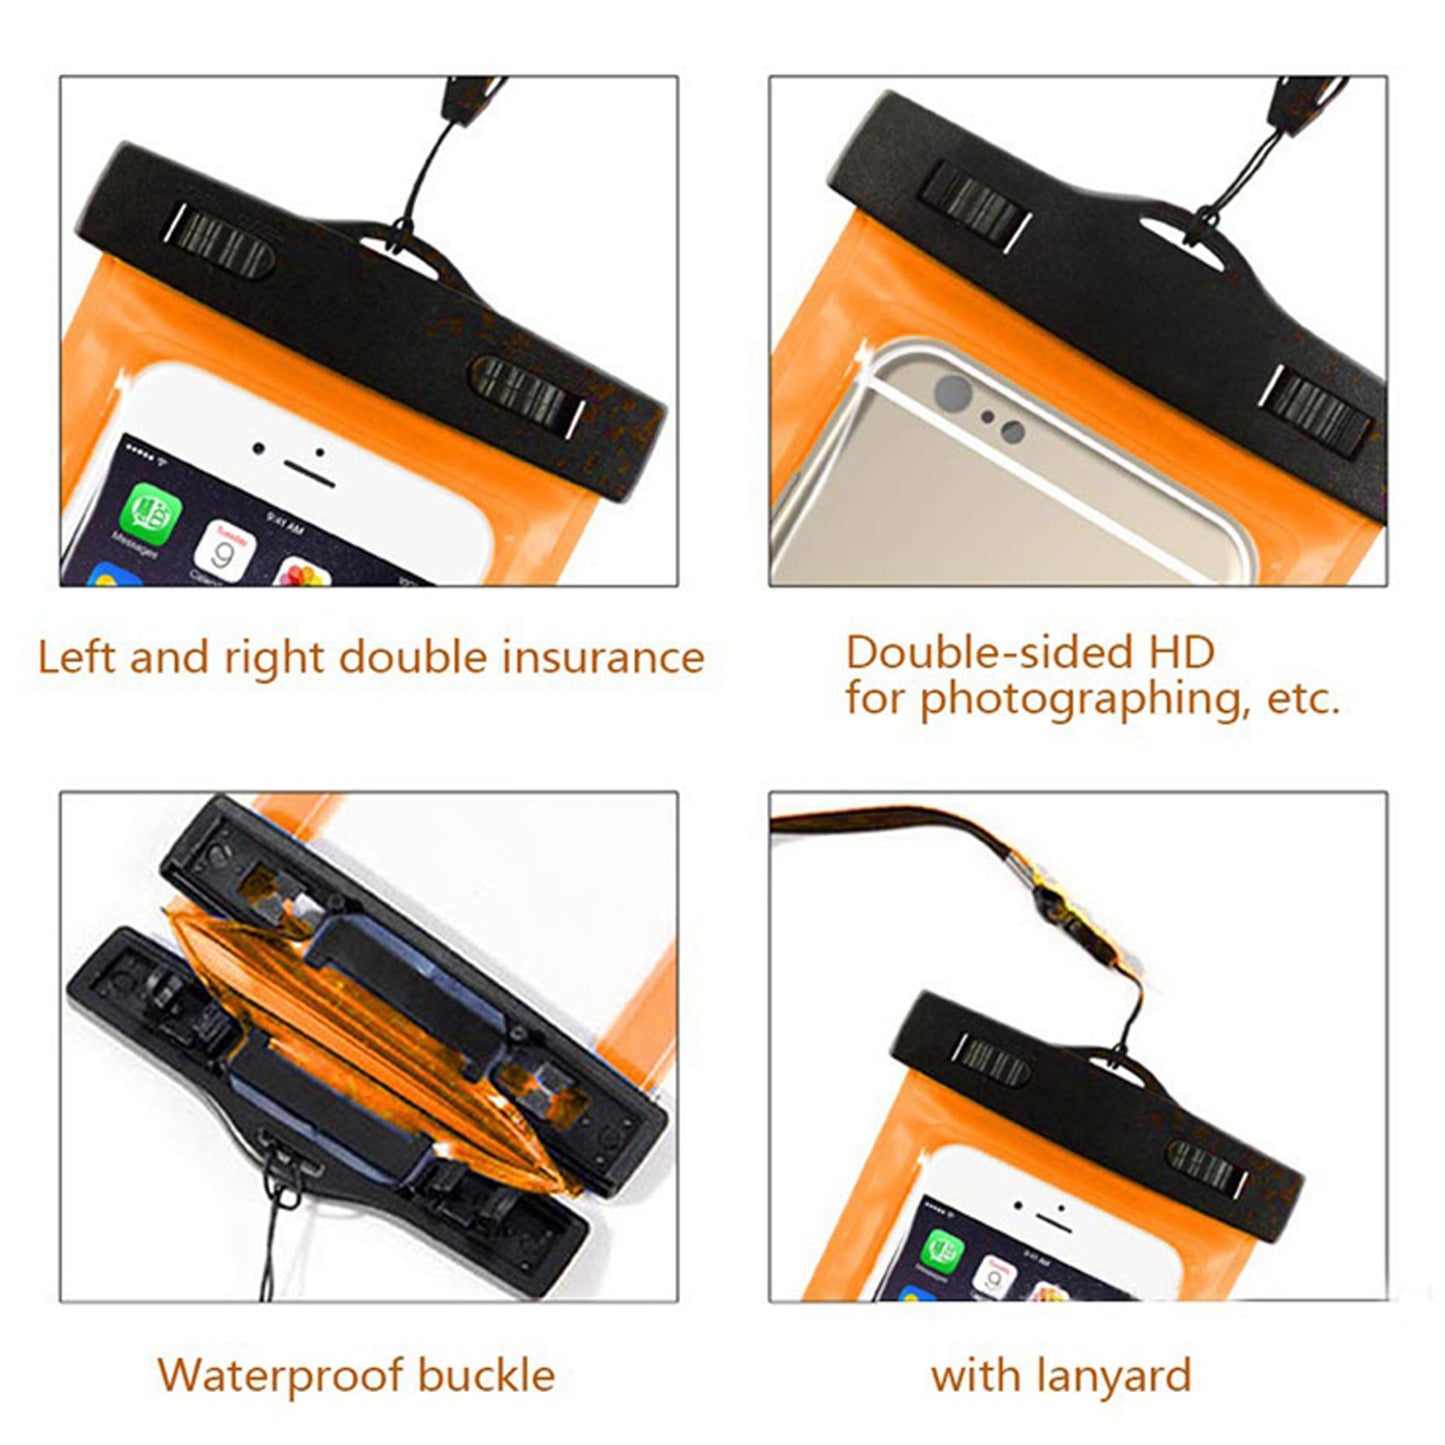 WRADER Pouch for Rain Mobile Touch Sensitive Waterproof Mobile Pouch with Strap, Size upto 6.5 Inches Mobiles